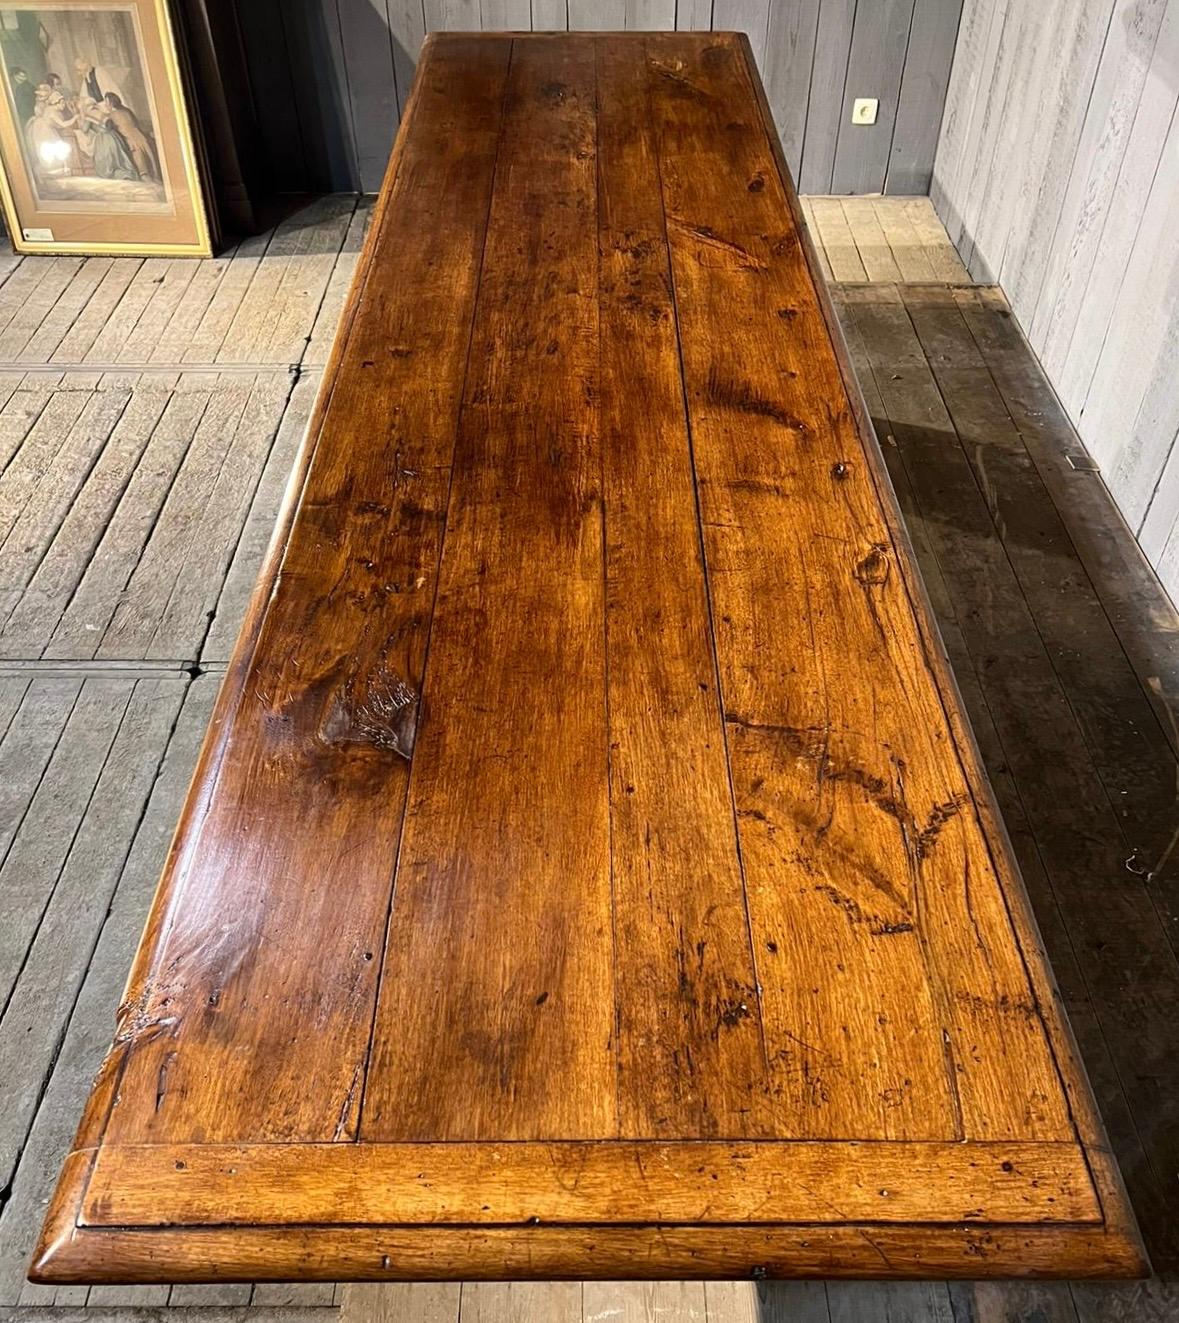 A simply stunning French Solid Walnut Dining Table. Dating to the later part of the 19th Century and having a wonderful Original colour and patina which we have brought out with a wax. Its long at 3.2 meters and made from solid Walnut which is